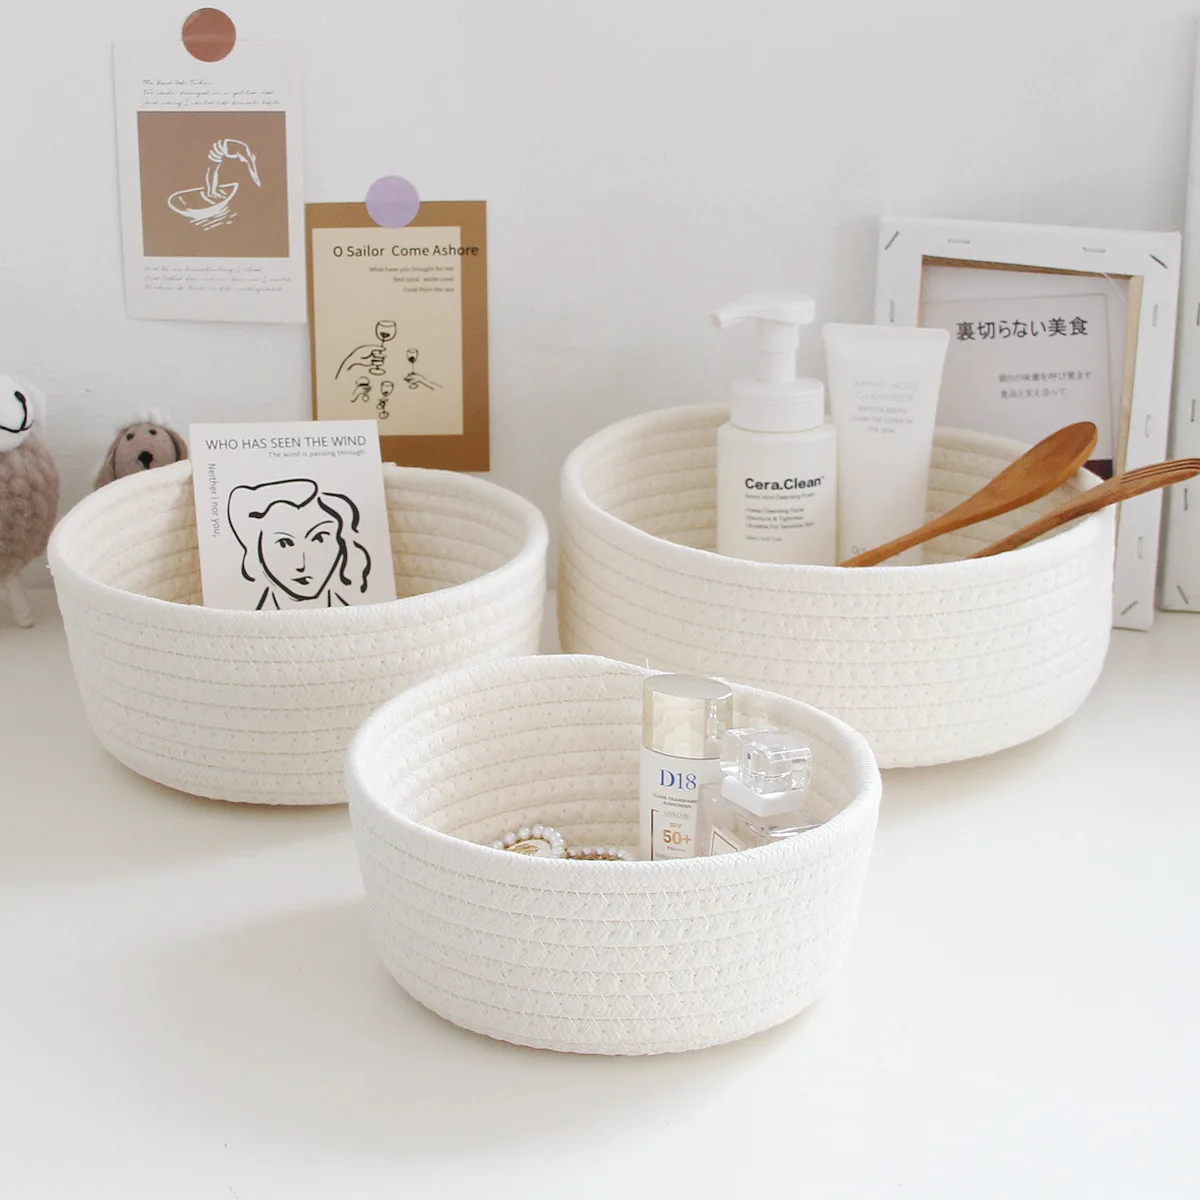 

Cotton Thread Woven Storage Basket Desktop Sundries Items Cleaning Cases Toys Snacks Keys Pens Small Things Sorting Organizing